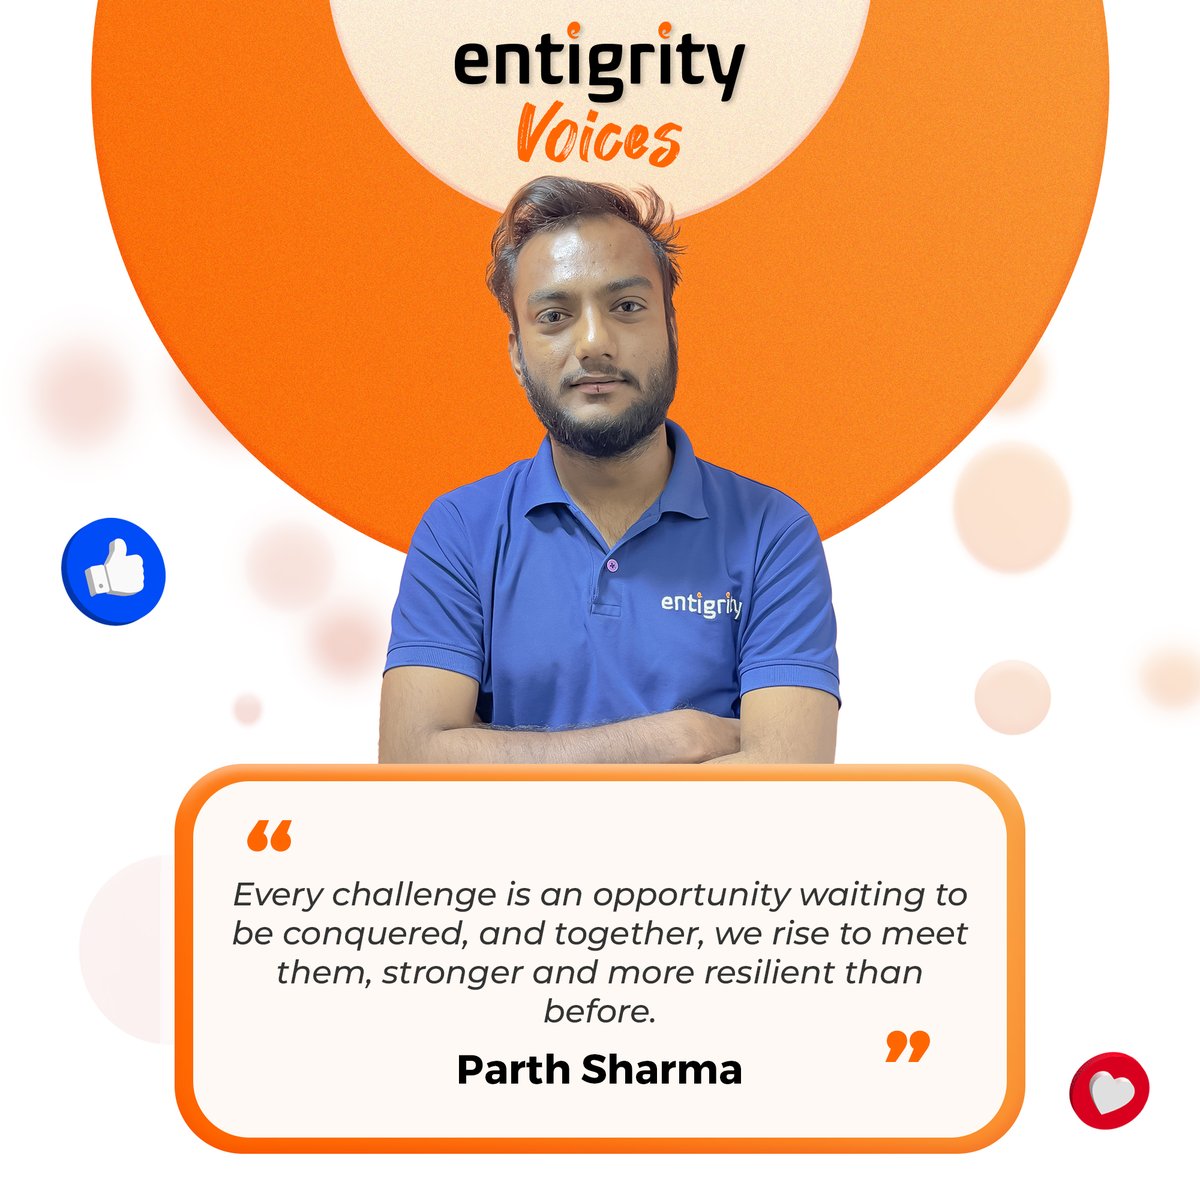 Facing challenges head-on is our mantra! Each obstacle is a chance to grow, evolve, and emerge even stronger. With unity as our strength, we tackle them as a team, fostering resilience and determination along the way. Together, we're unstoppable. #Entigrity #Teamwork